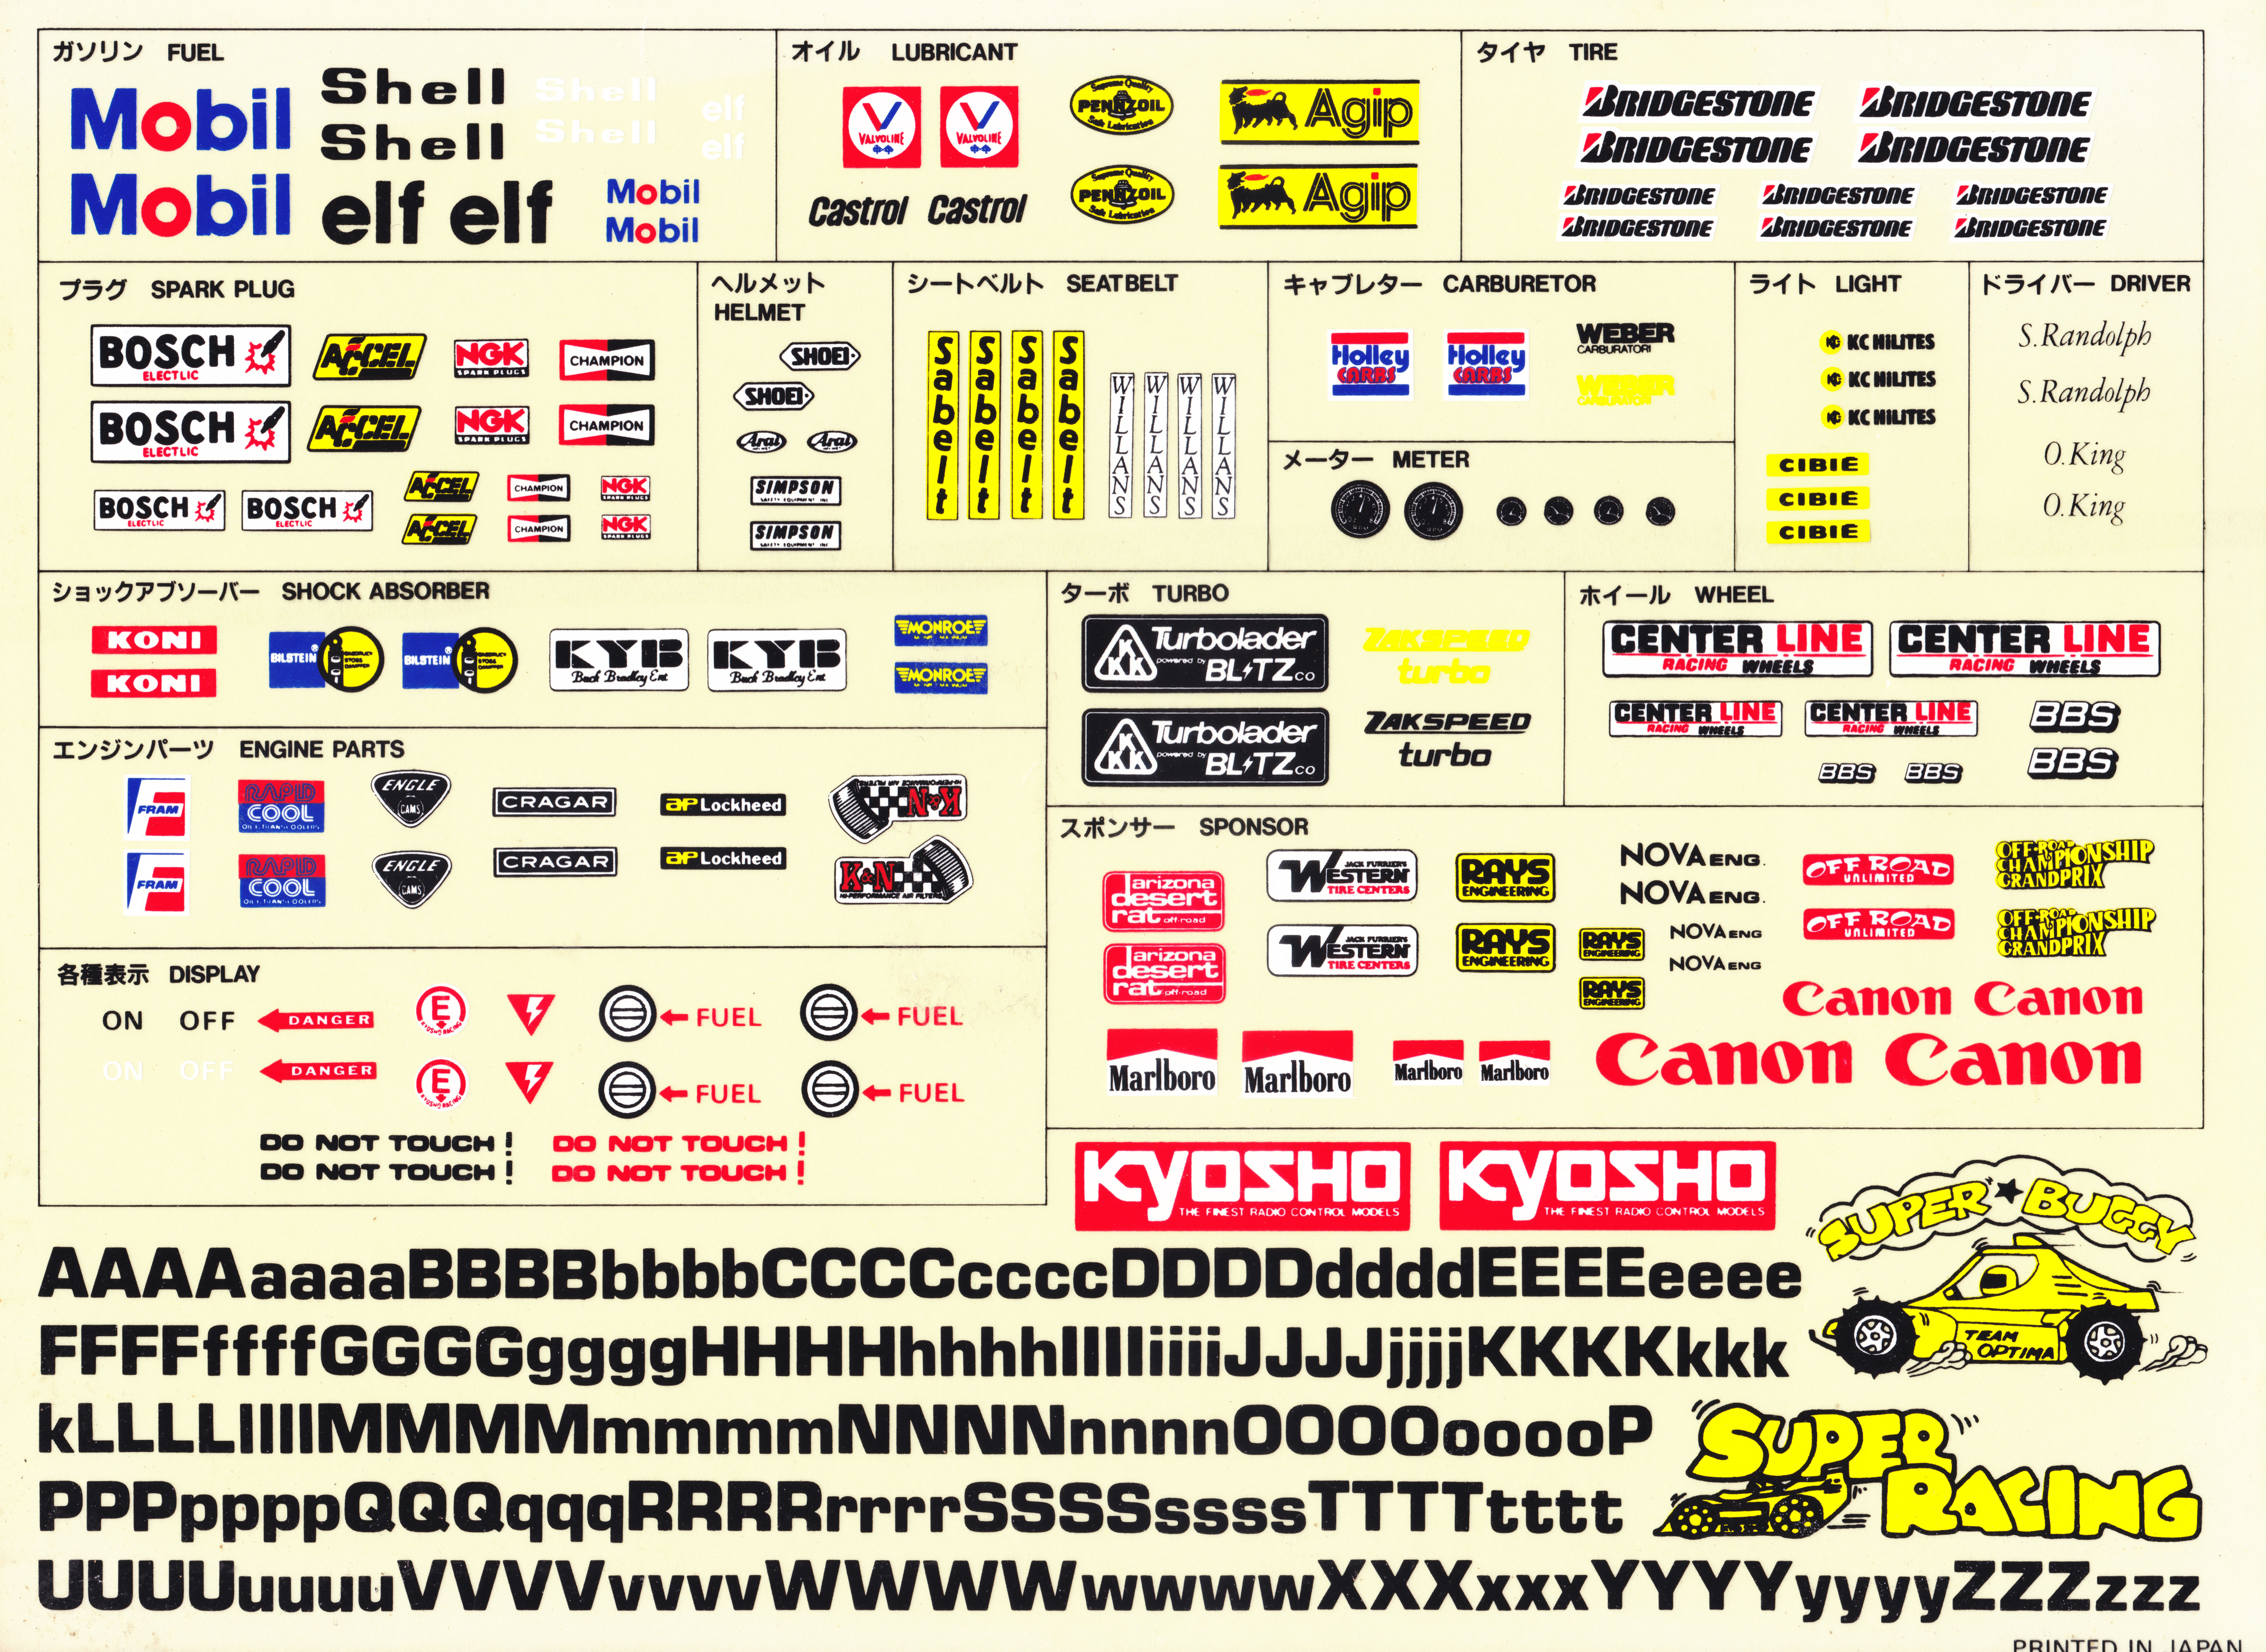 Directory Listing of Decals/Kyosho/ (Vintage RC car manuals